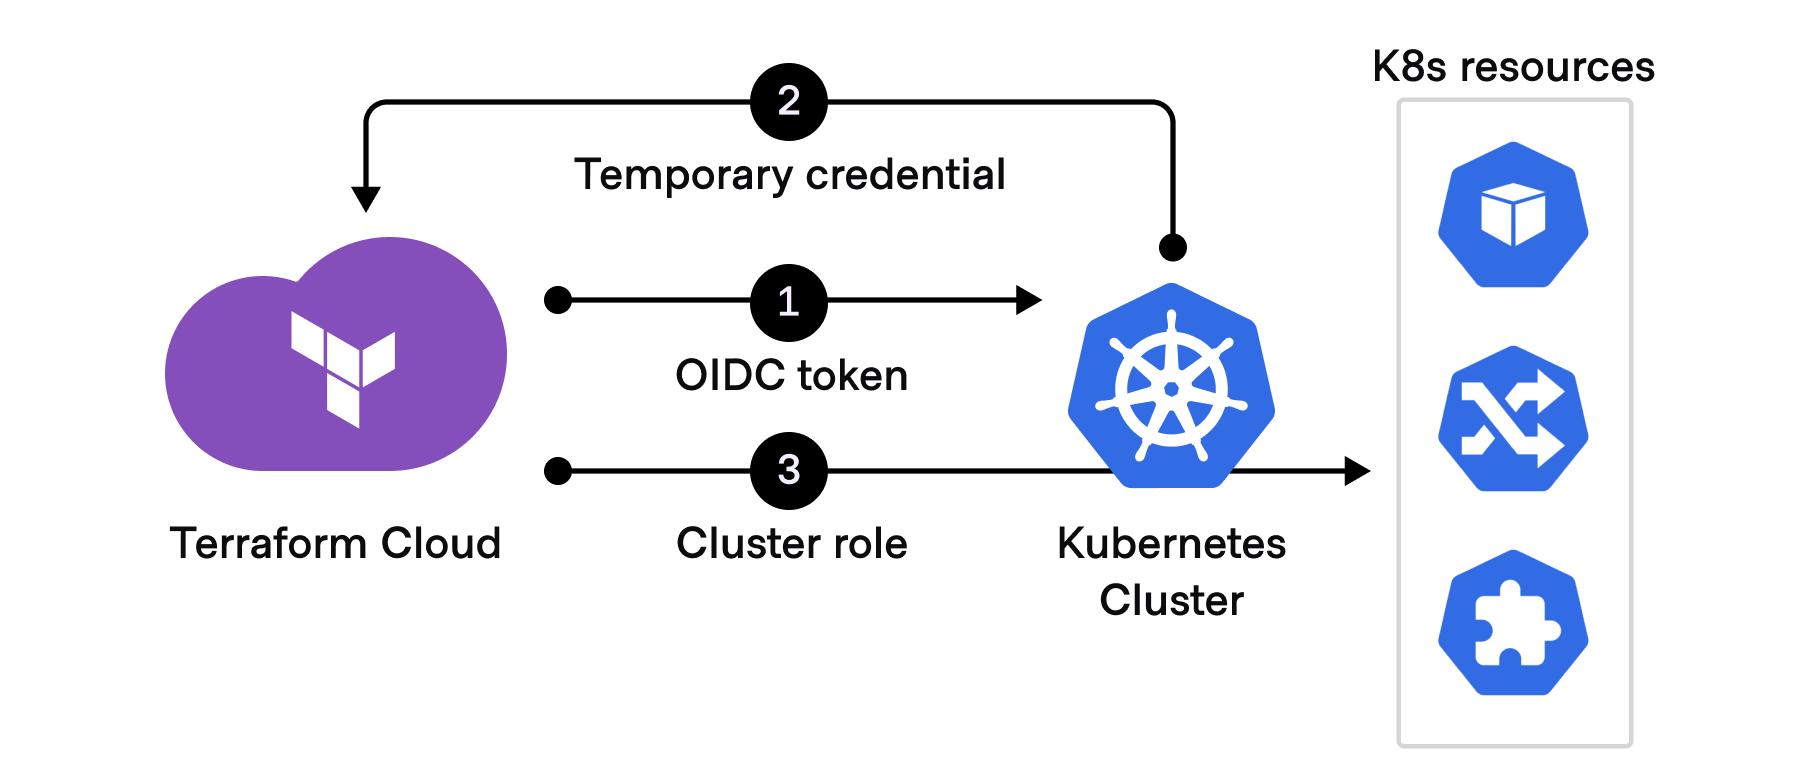 Using an industry-standard OIDC workflow, a temporary credential is automatically generated for each Terraform Cloud run.